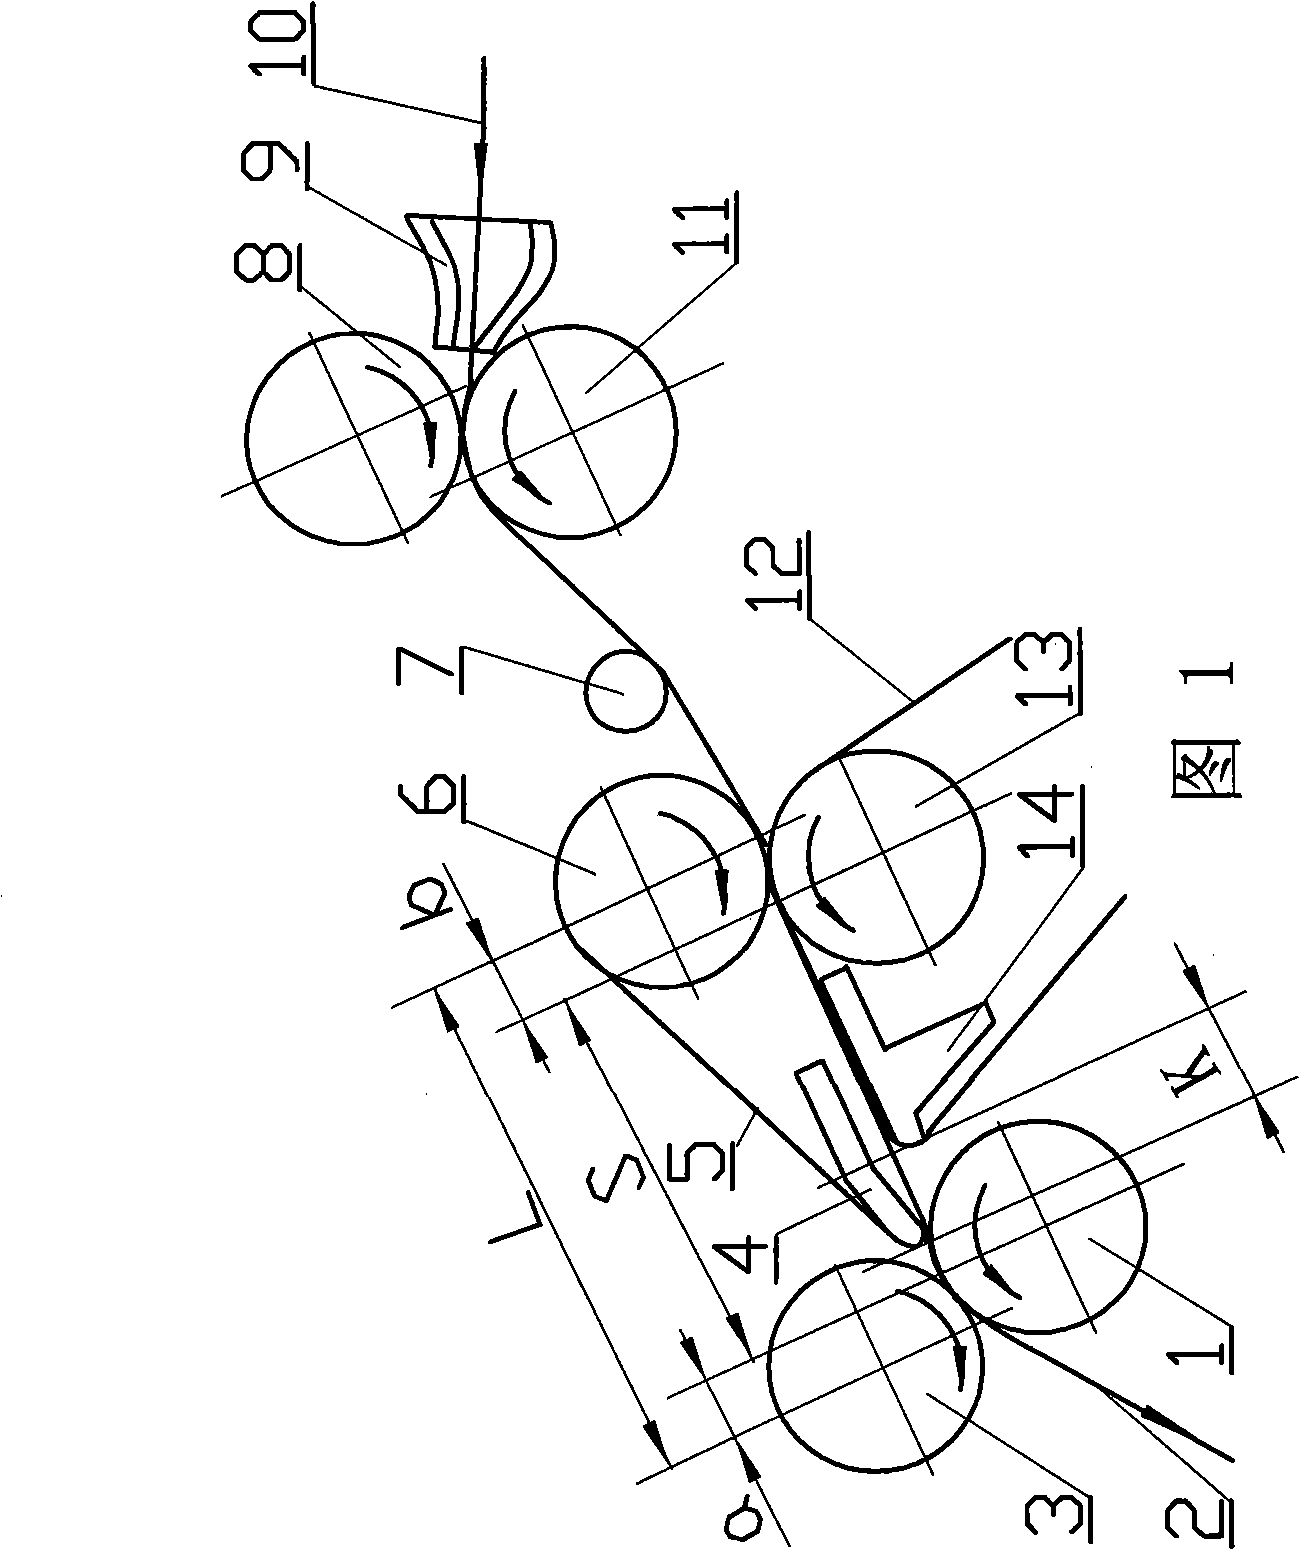 High power drafting device for ring spinning frame